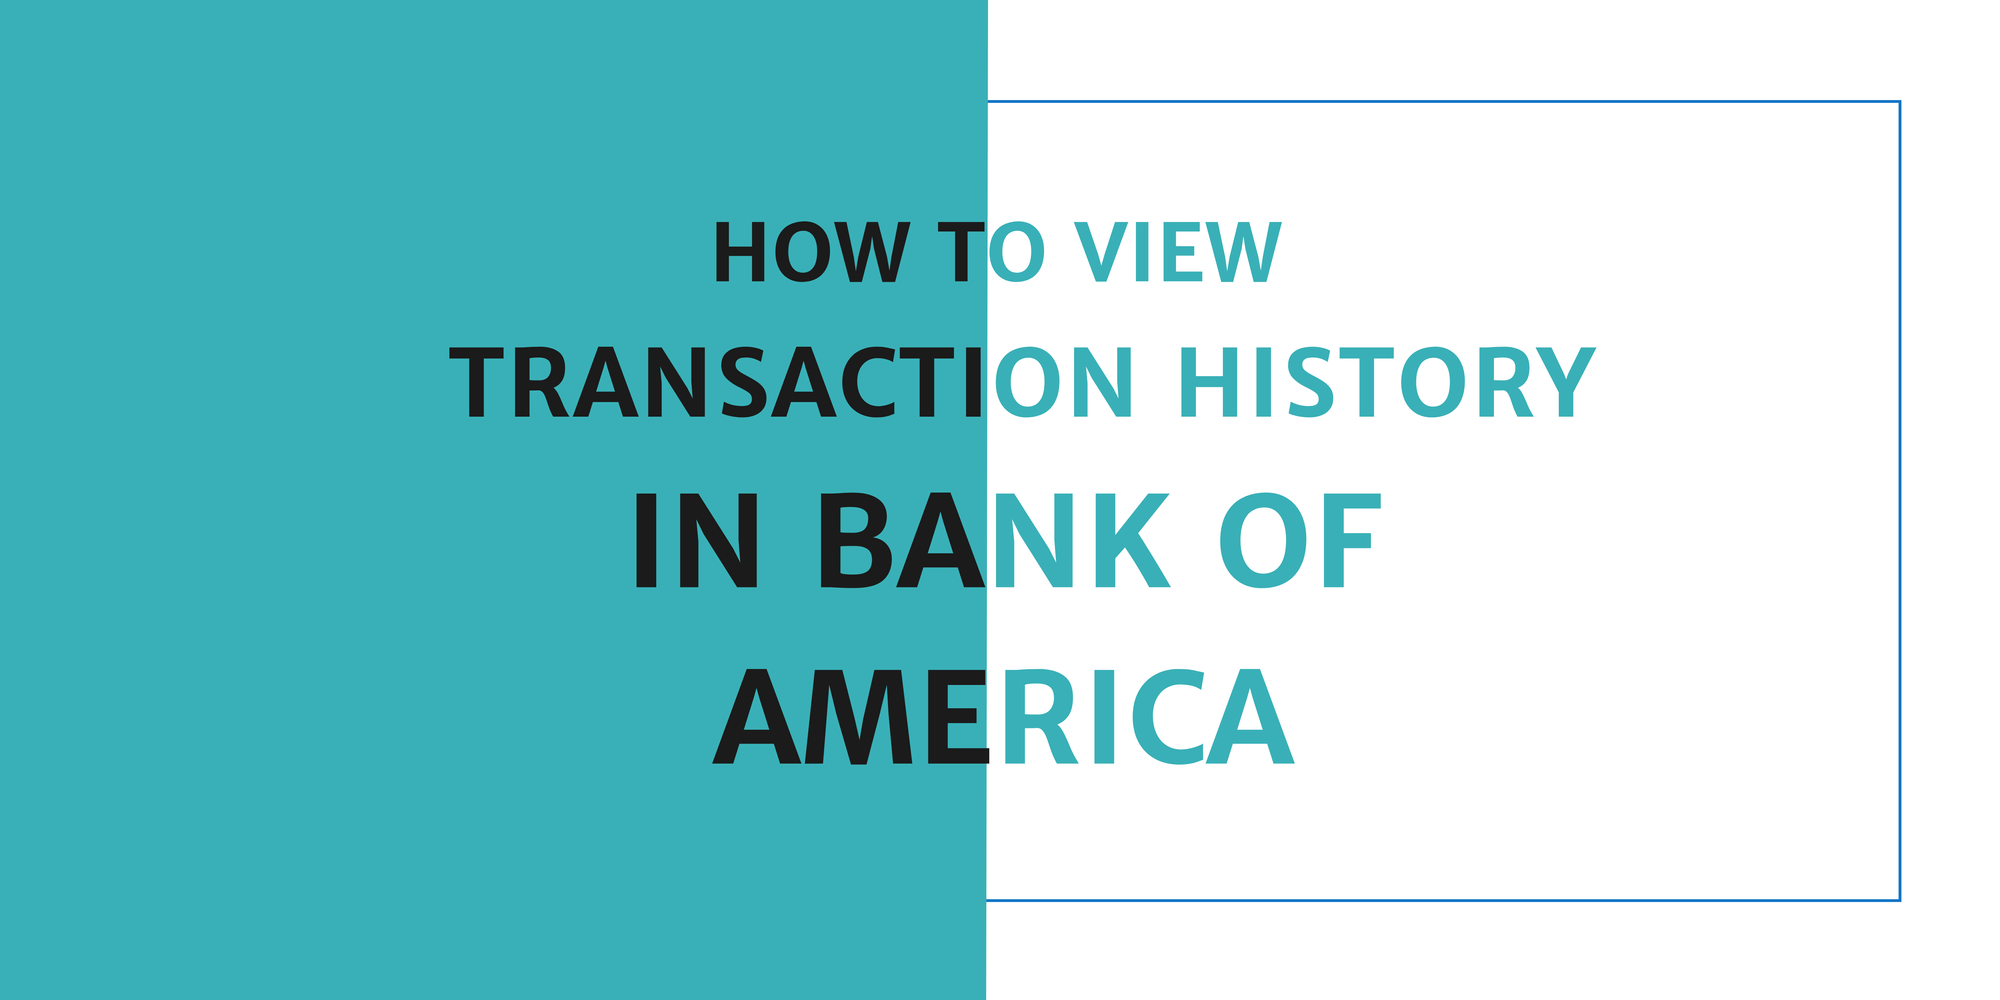 How to View Your Transaction History in Bank of America